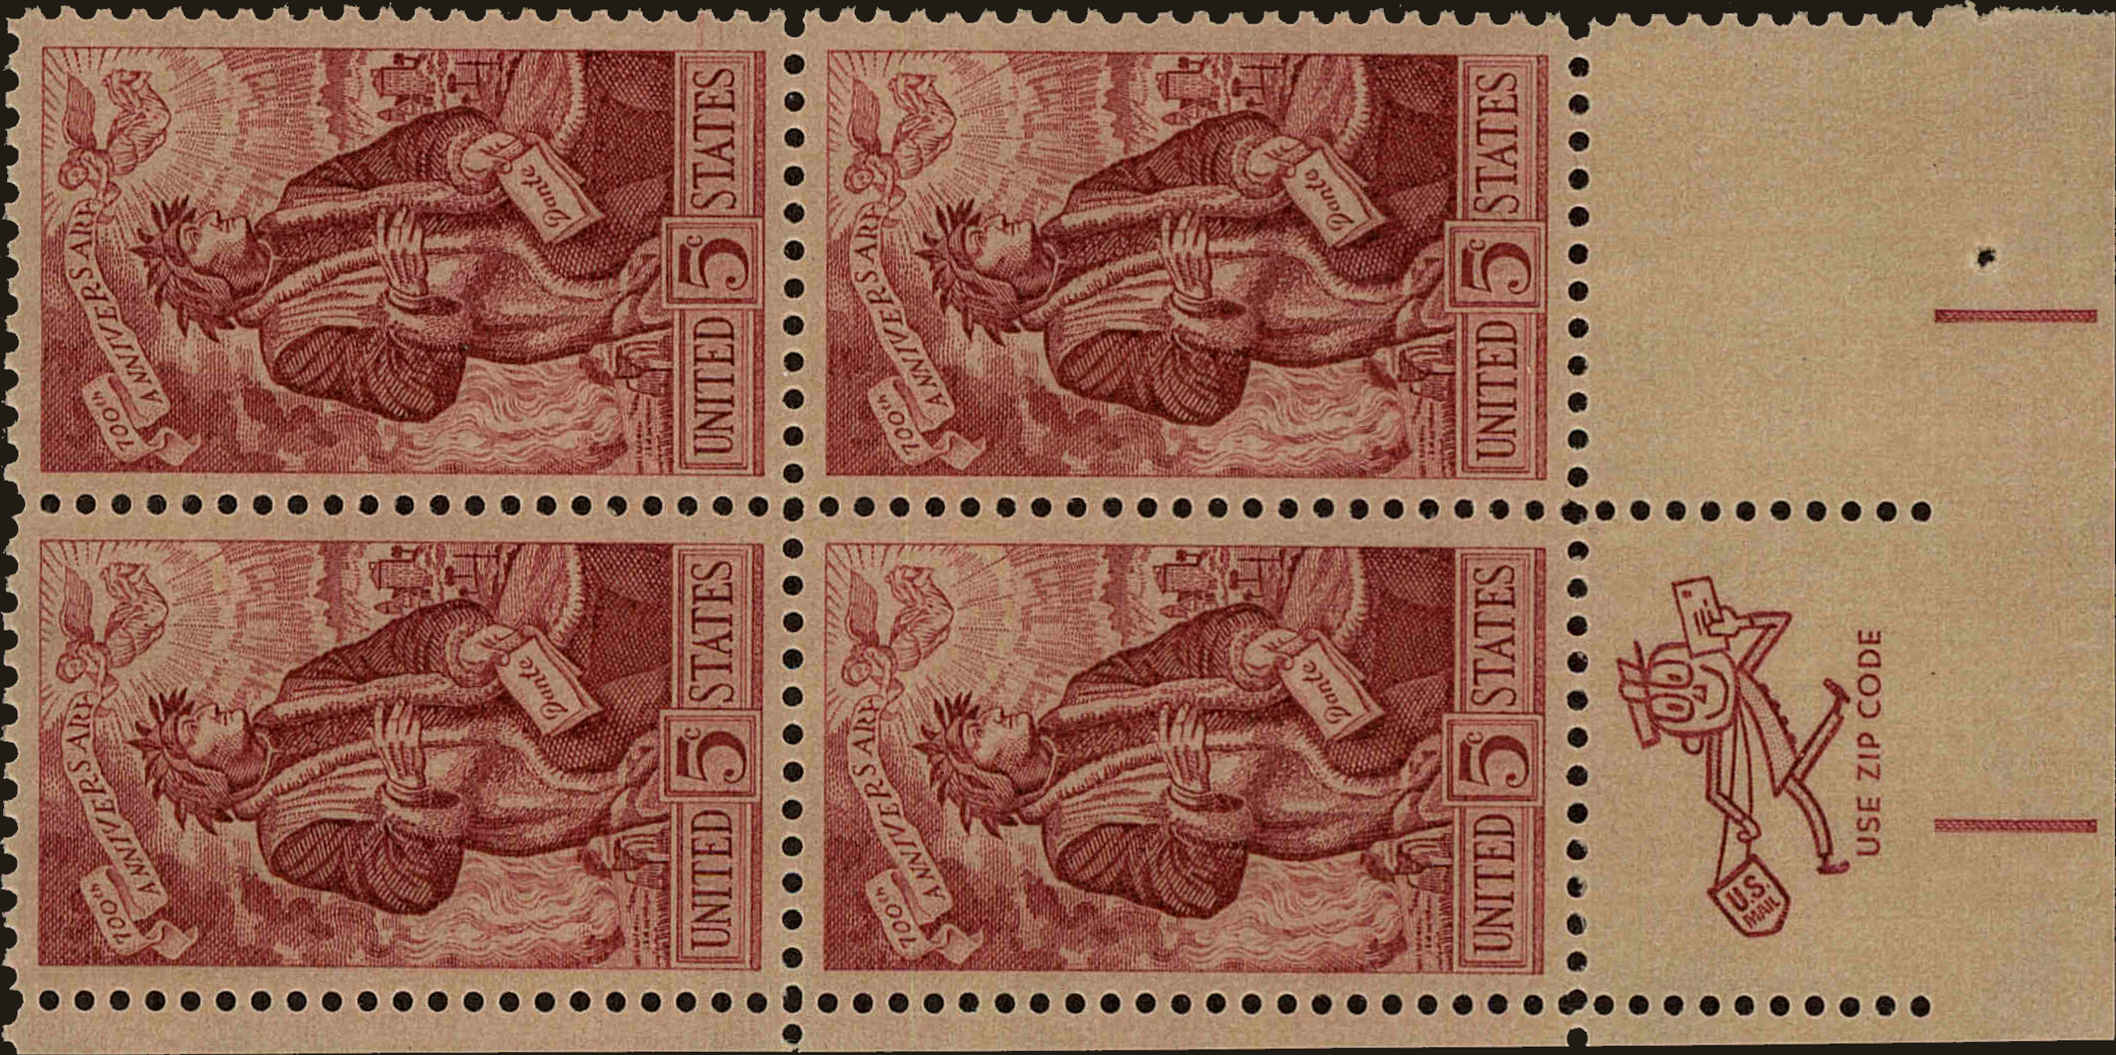 Front view of United States 1268 collectors stamp